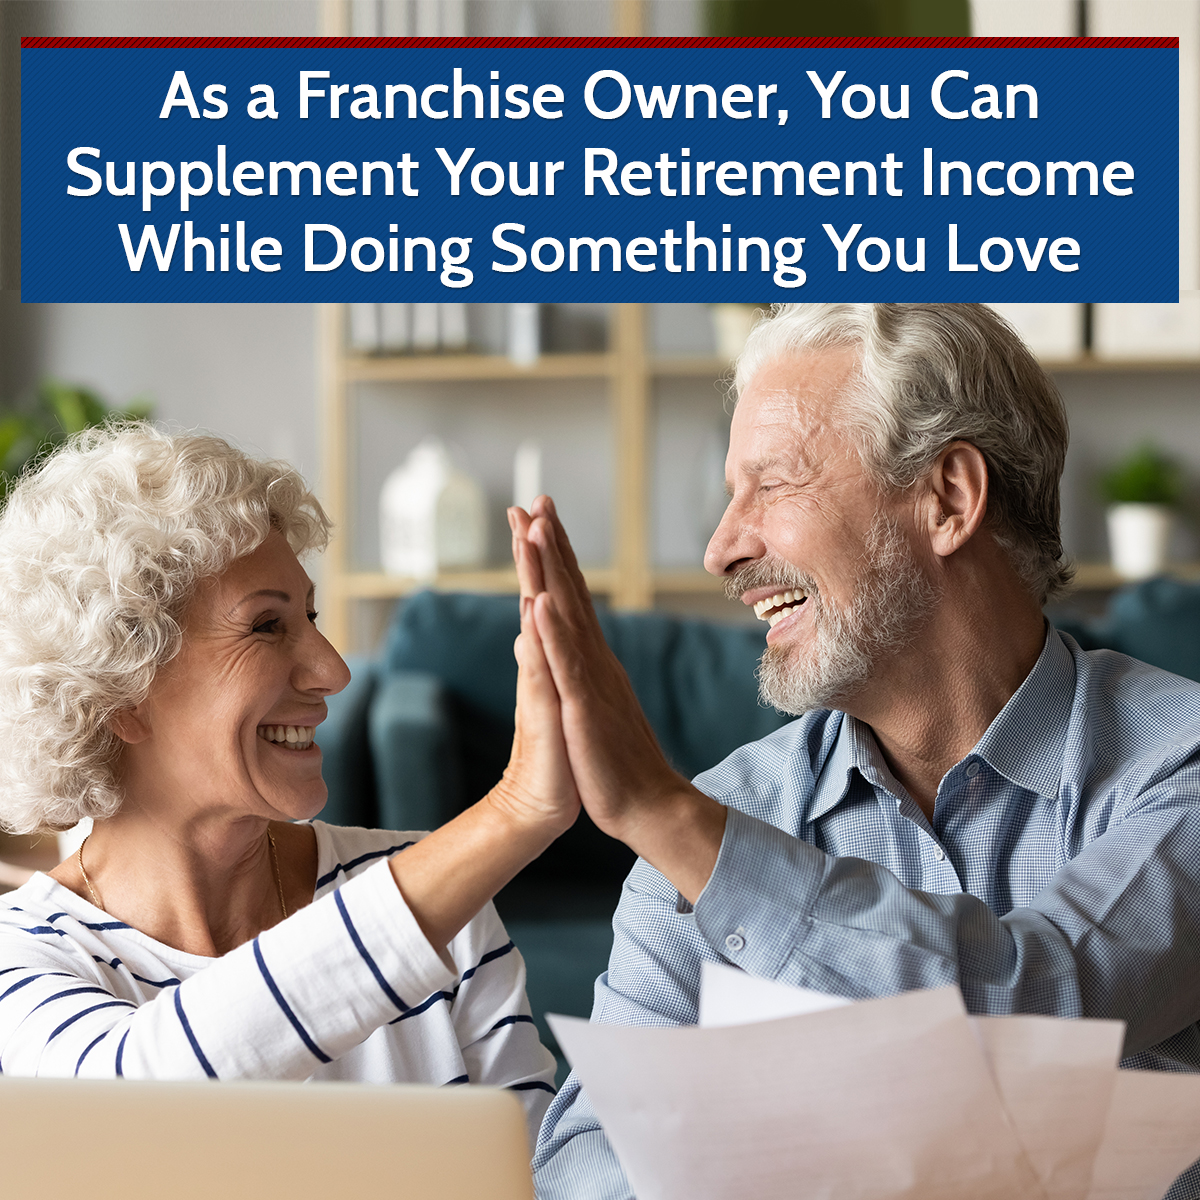 As a Franchise Owner, You Can Supplement Your Retirement Income While Doing Something You Love